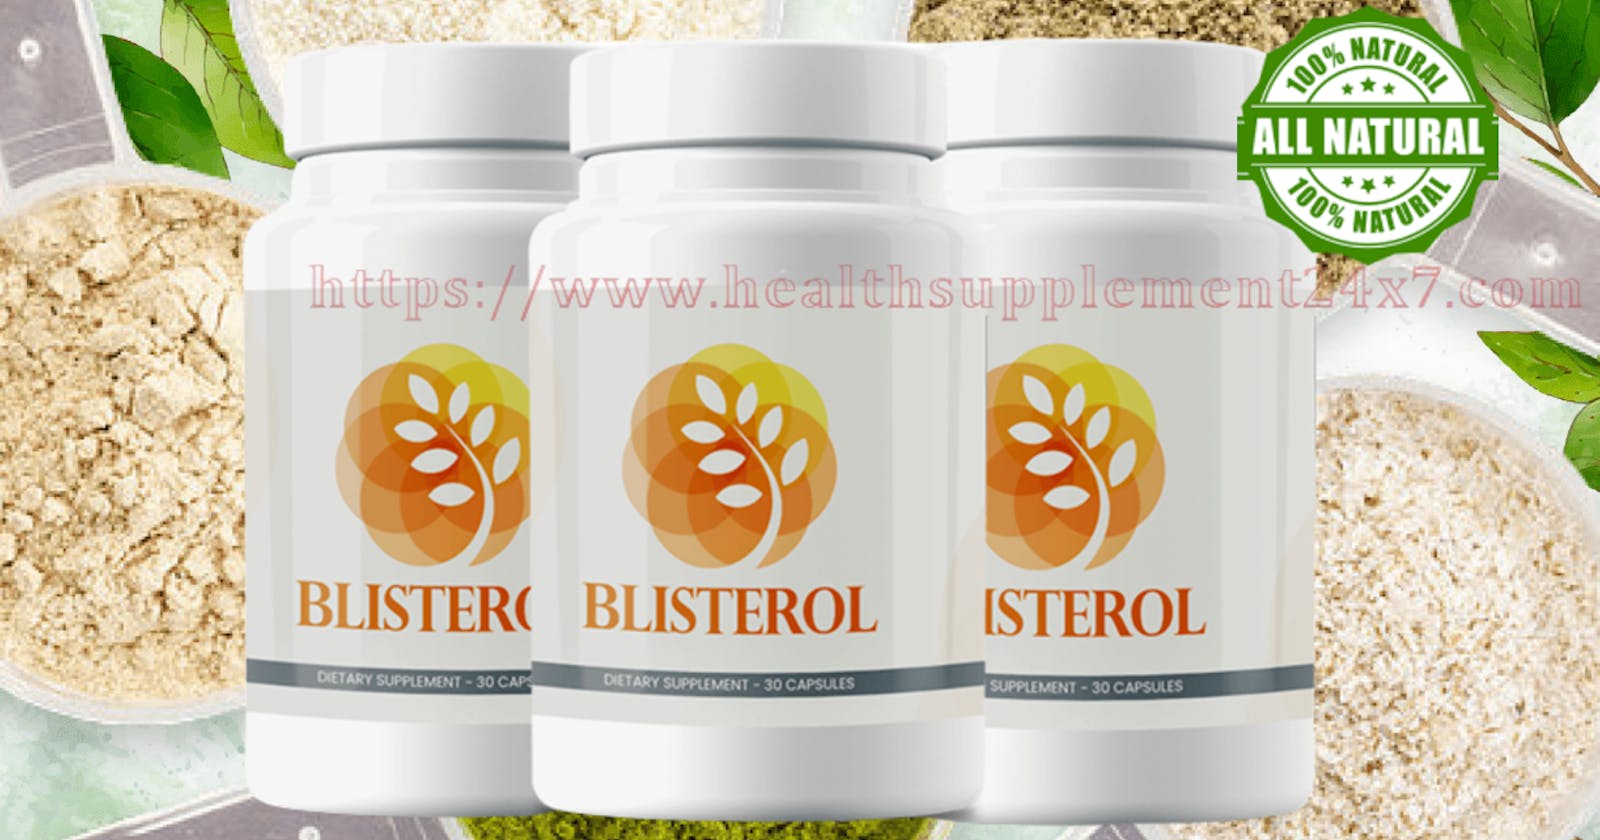 Blisterol {Clinical Proved} Escape Oral And Genital Herpes Virus For Good Skin And Shocking Result(Spam Or Legit)